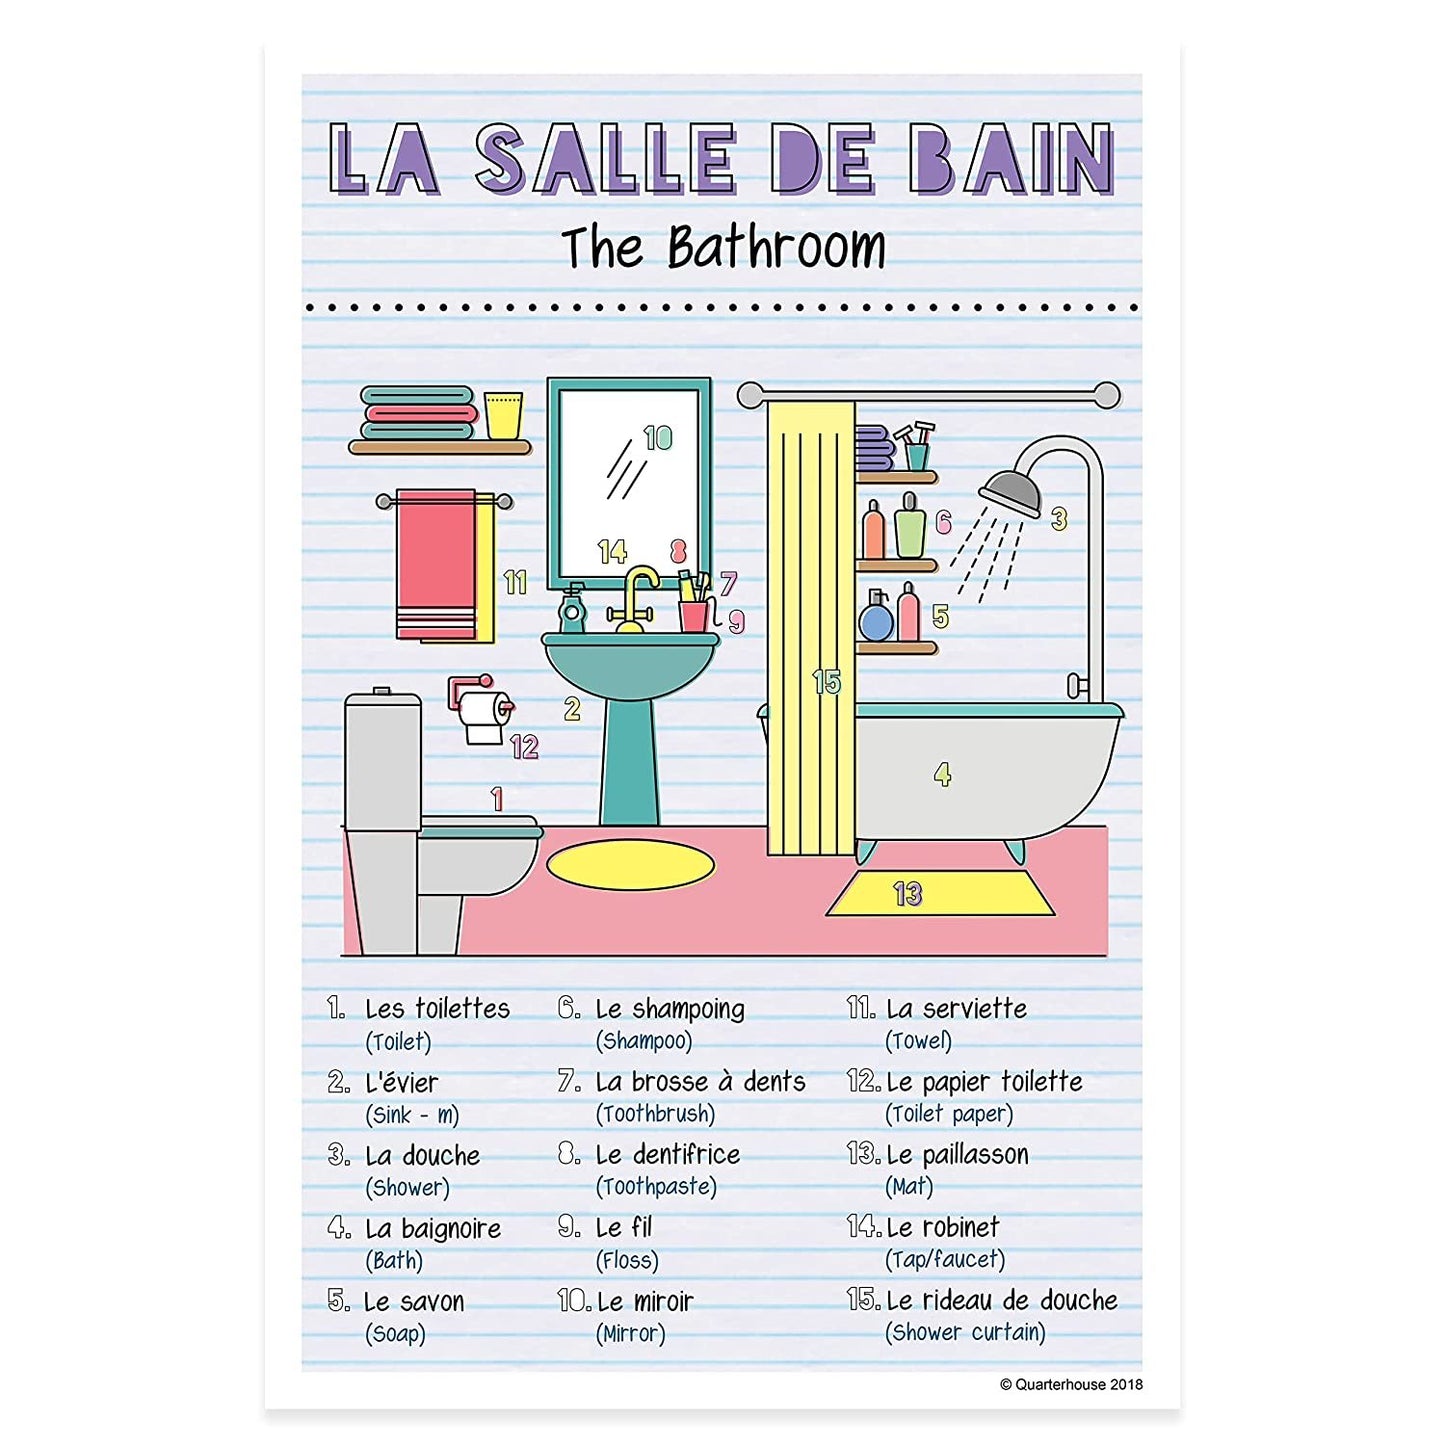 Quarterhouse French Verbs & Beginner Vocabulary (Set F) Poster Set, French Classroom Learning Materials for K-12 Students and Teachers, Set of 11, 12 x 18 Inches, Extra Durable